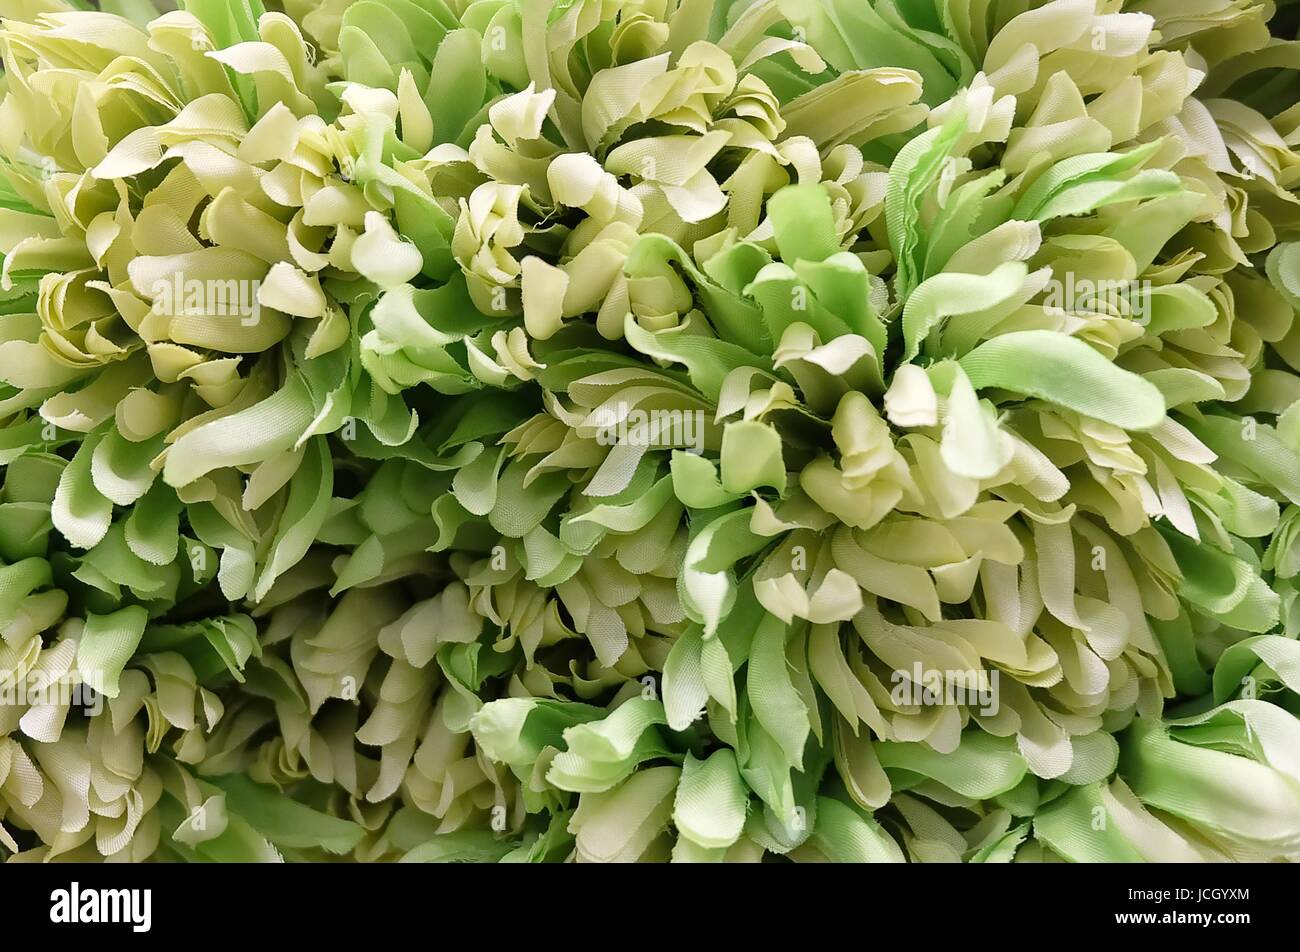 Background of Artificial Green Chrysanthemum Flowers for Home and Building Decoration. Stock Photo